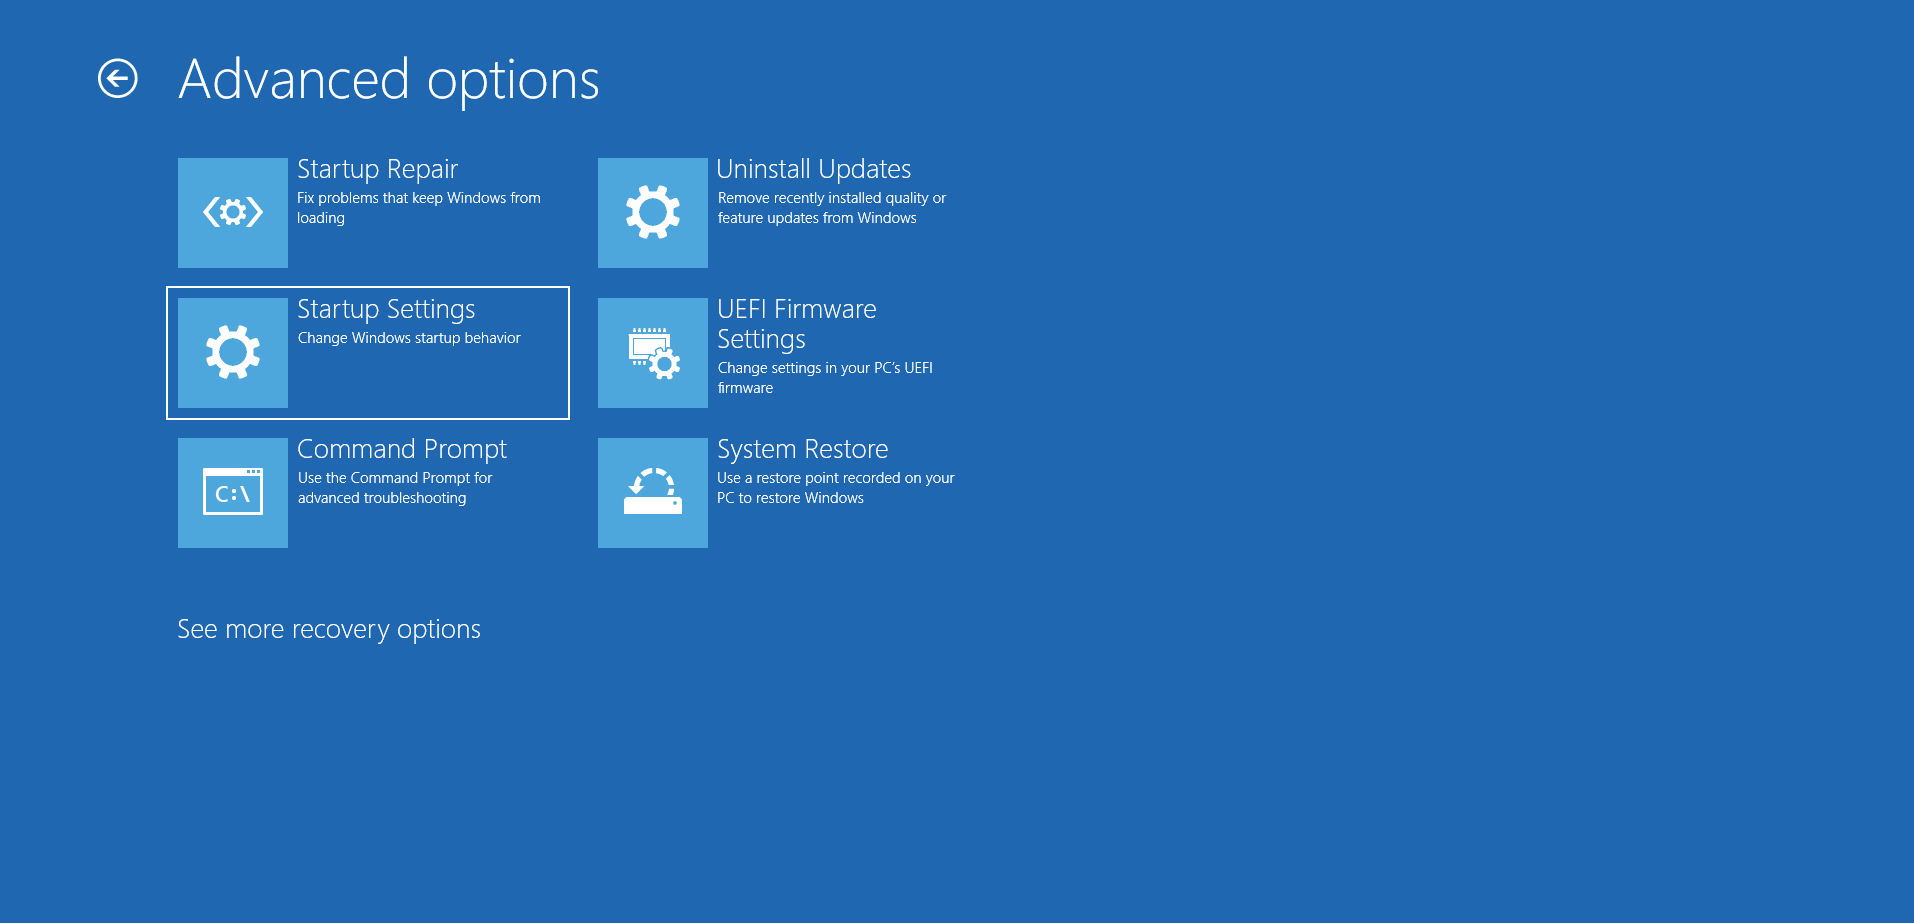 Click Startup Settings under Advanced Options.